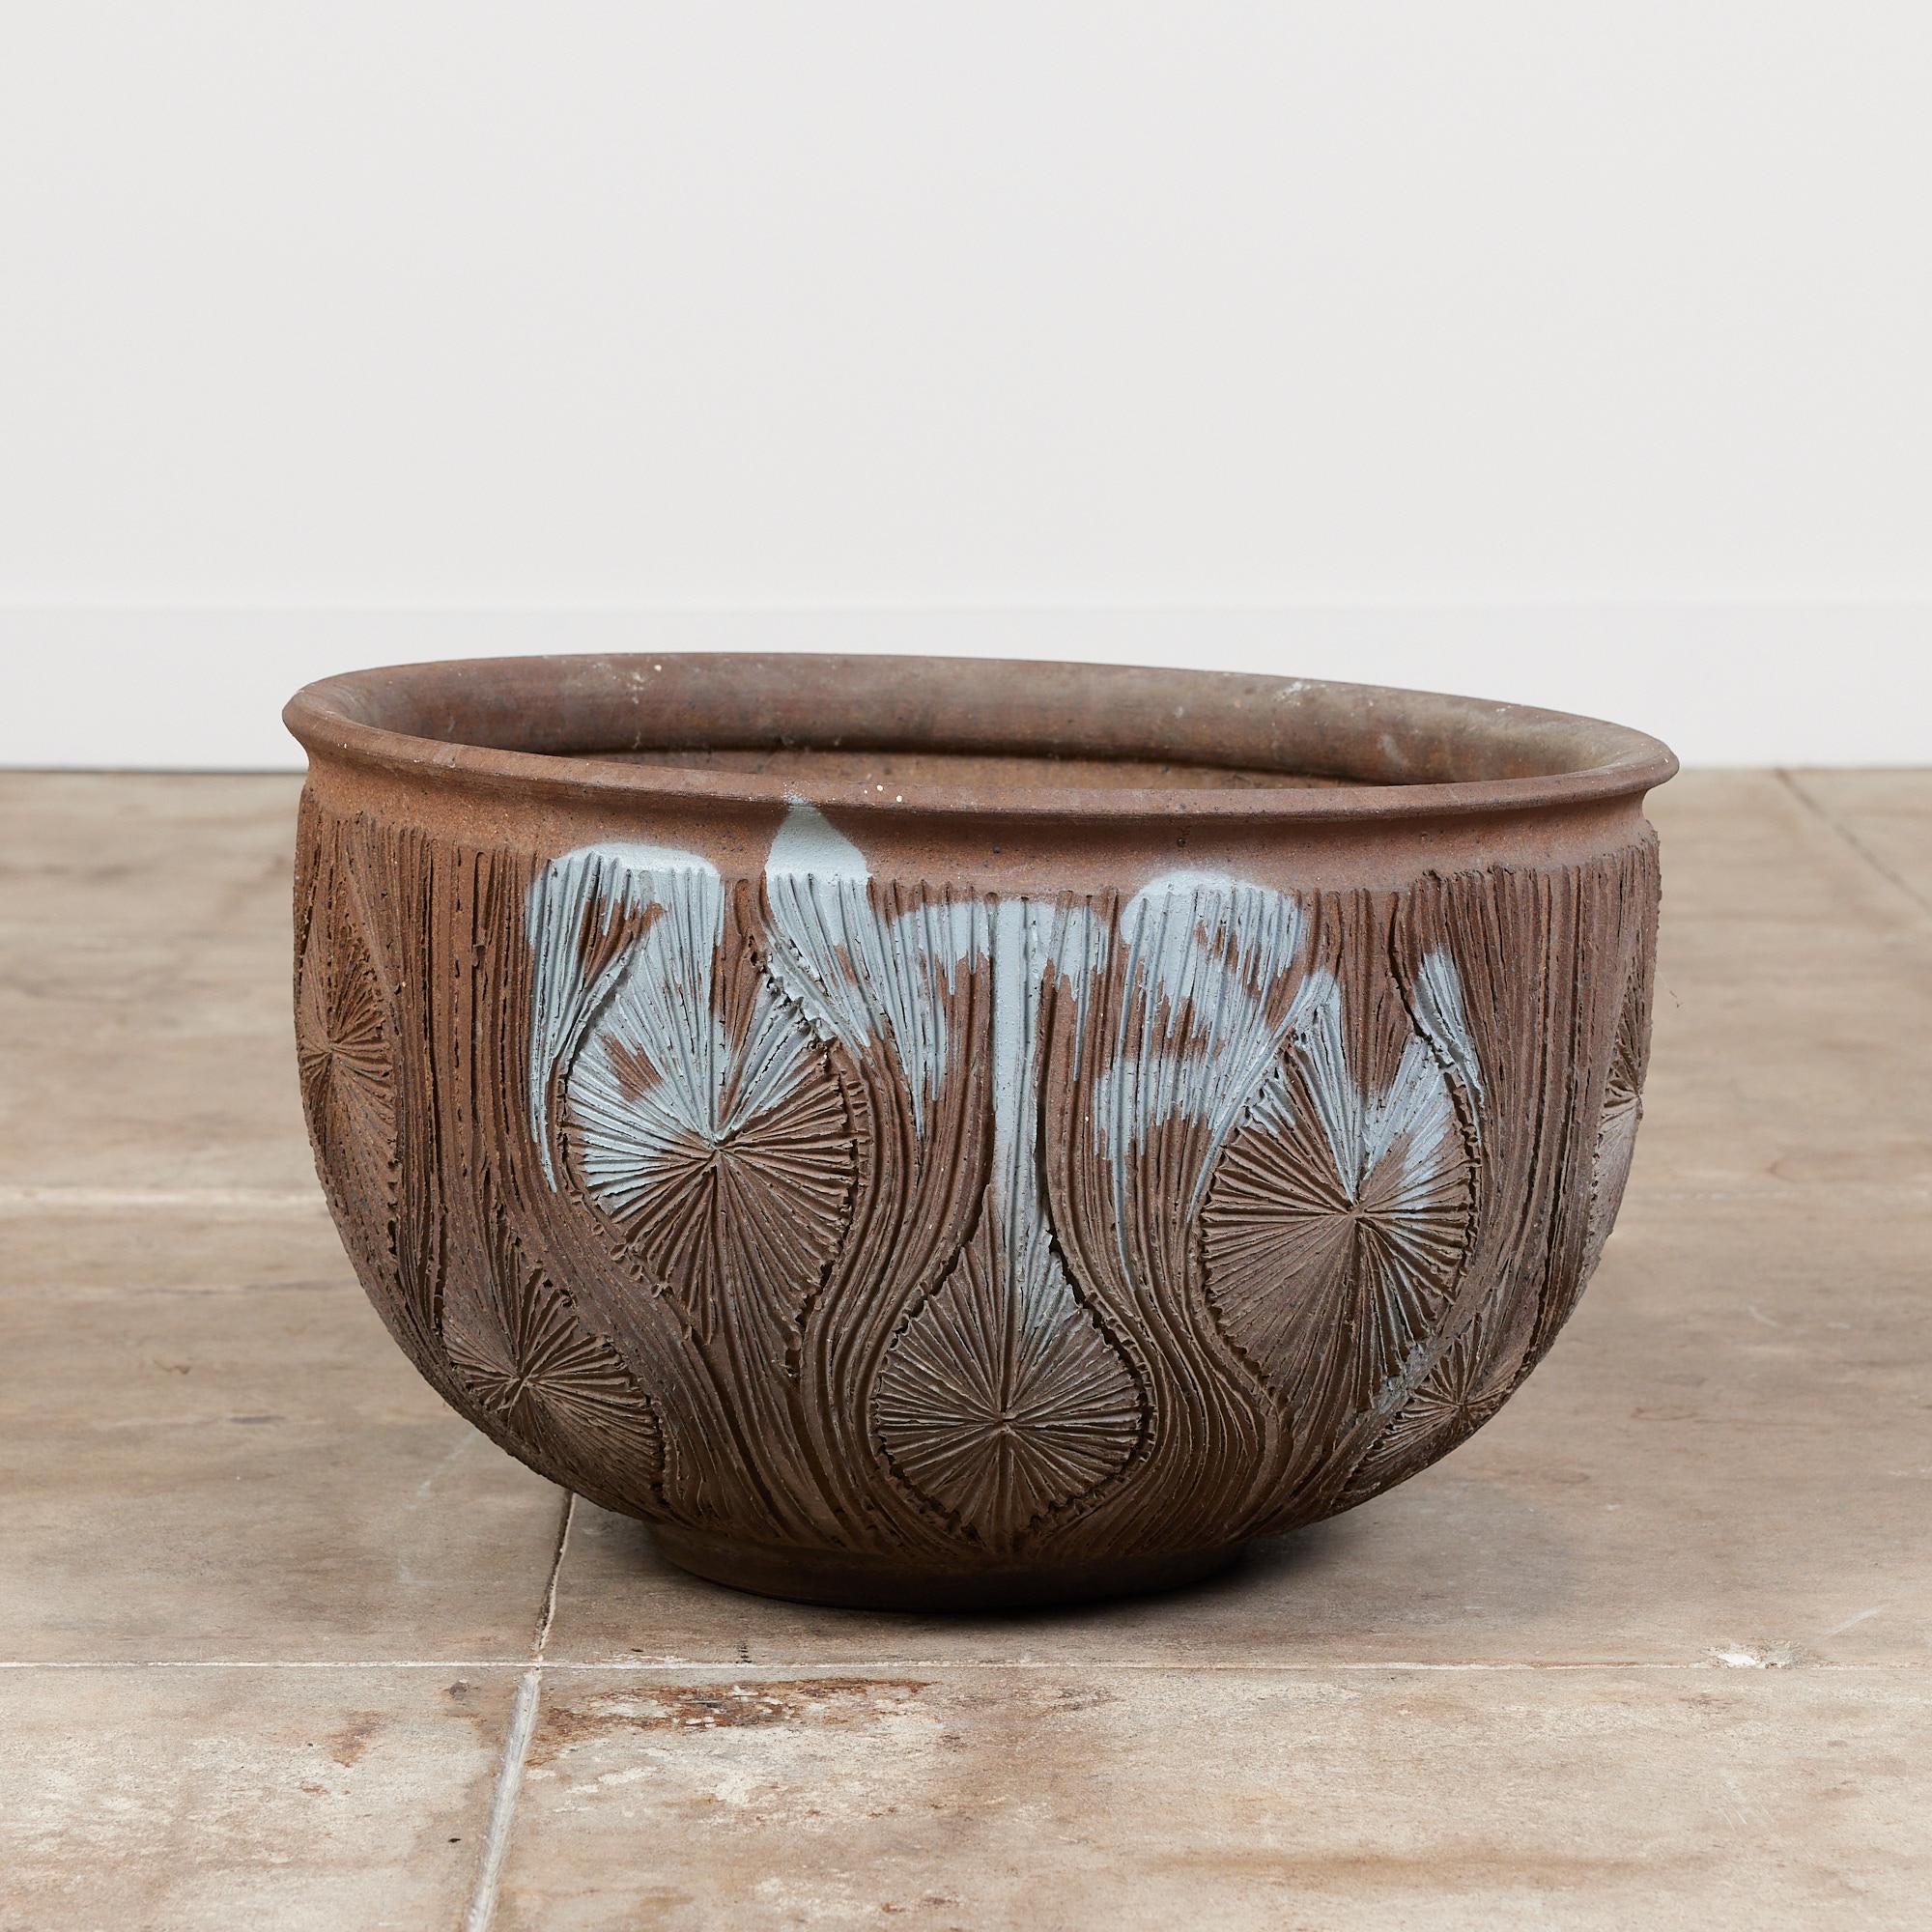 An unglazed stoneware bowl planter from David Cressey and Robert Maxwell's 1970s collaboration, Earthgender. The planter has a rounded lip, an incised all-over pattern in the 